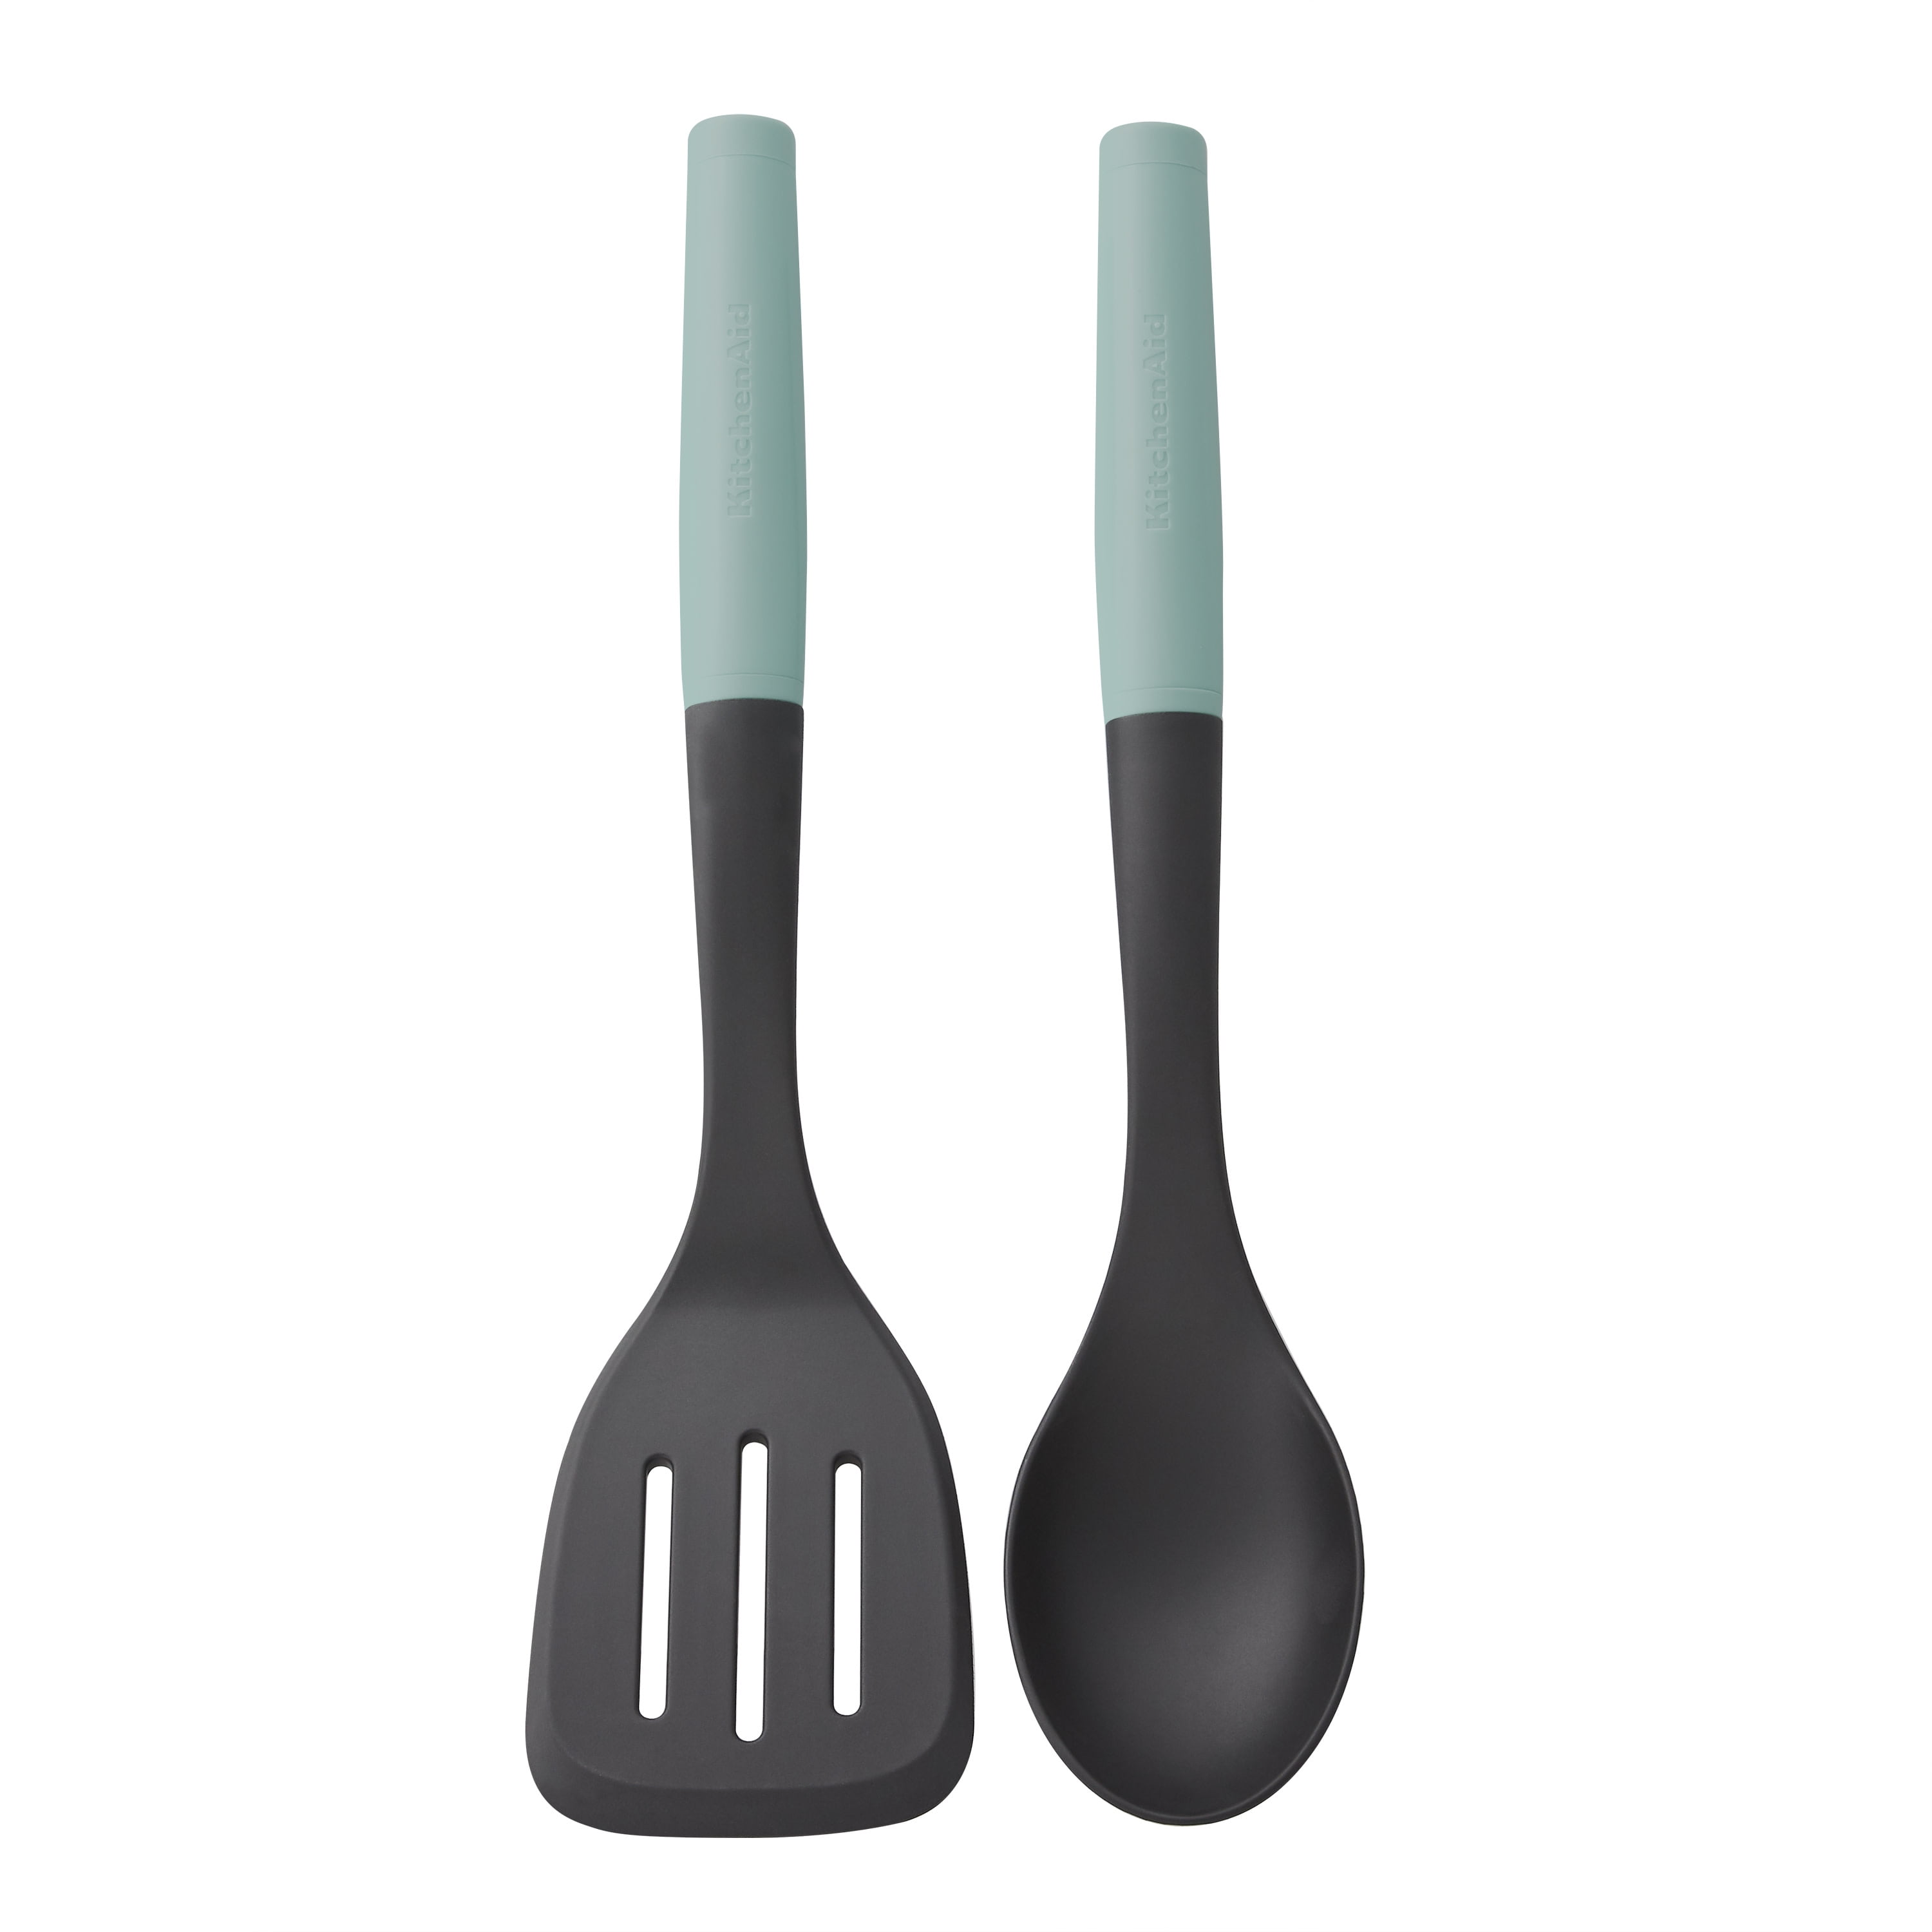  Mercer Culinary Partners in Education 23-Piece Millennia  Culinary School Kit,Black: Kitchen Tool Sets: Home & Kitchen